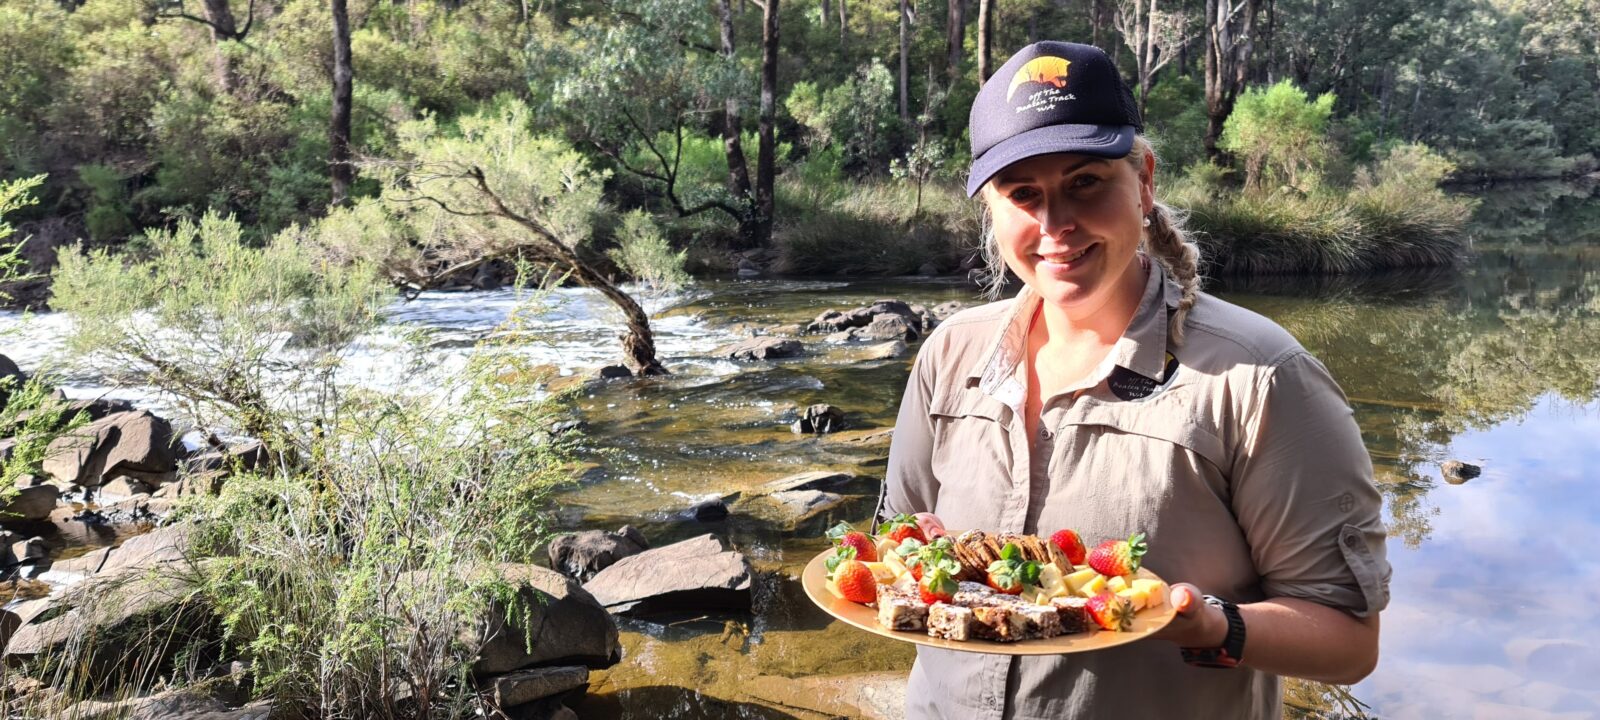 gourmet morning tea platter with smiling friendly guide and river in background